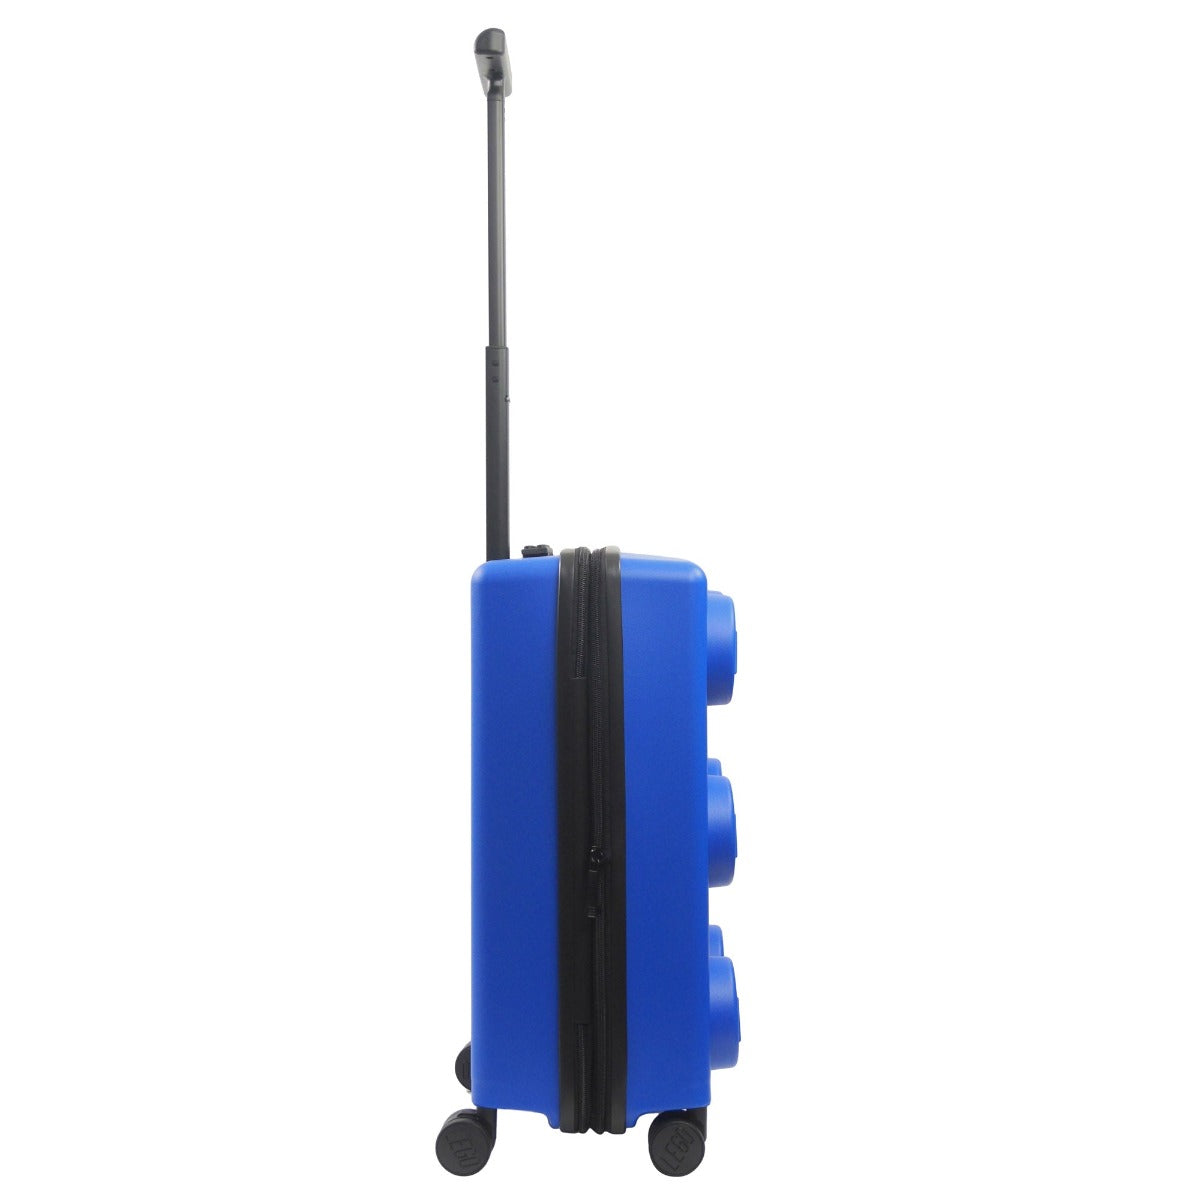 Blue Lego Signature Brick 2X3 Trolley 22" carry-on rolling luggage for travel